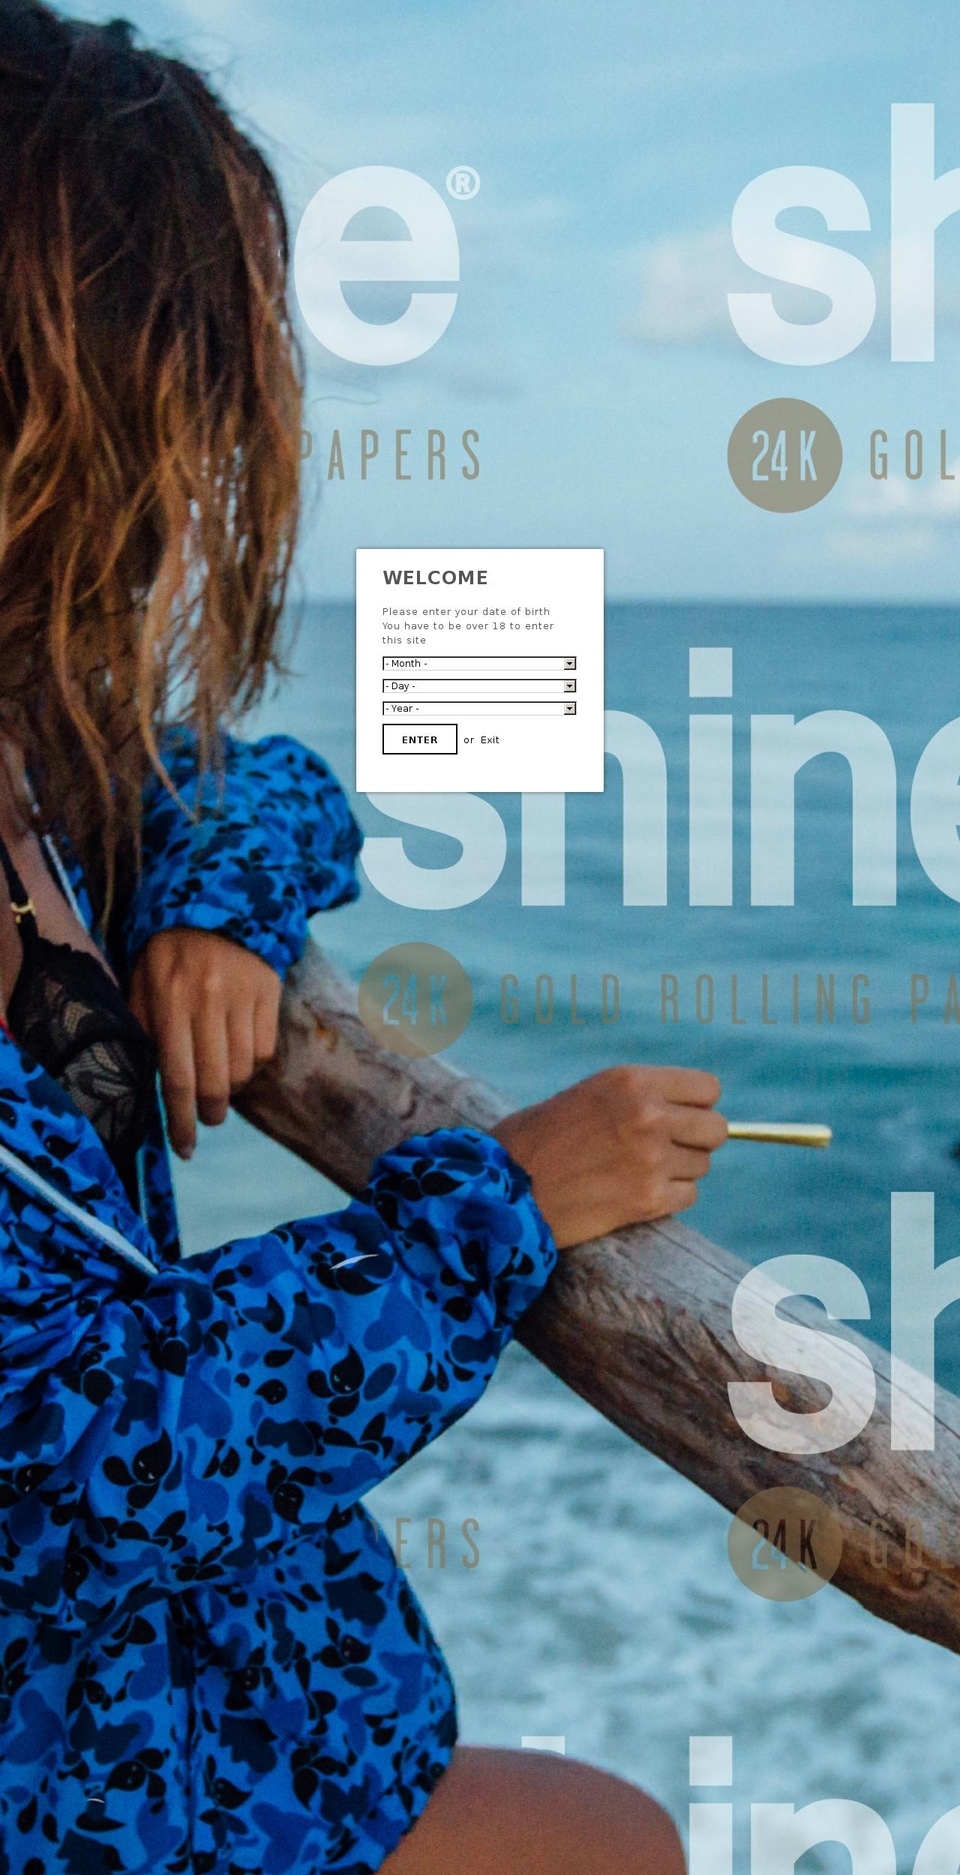 Motion Shopify theme site example shinepapers.com